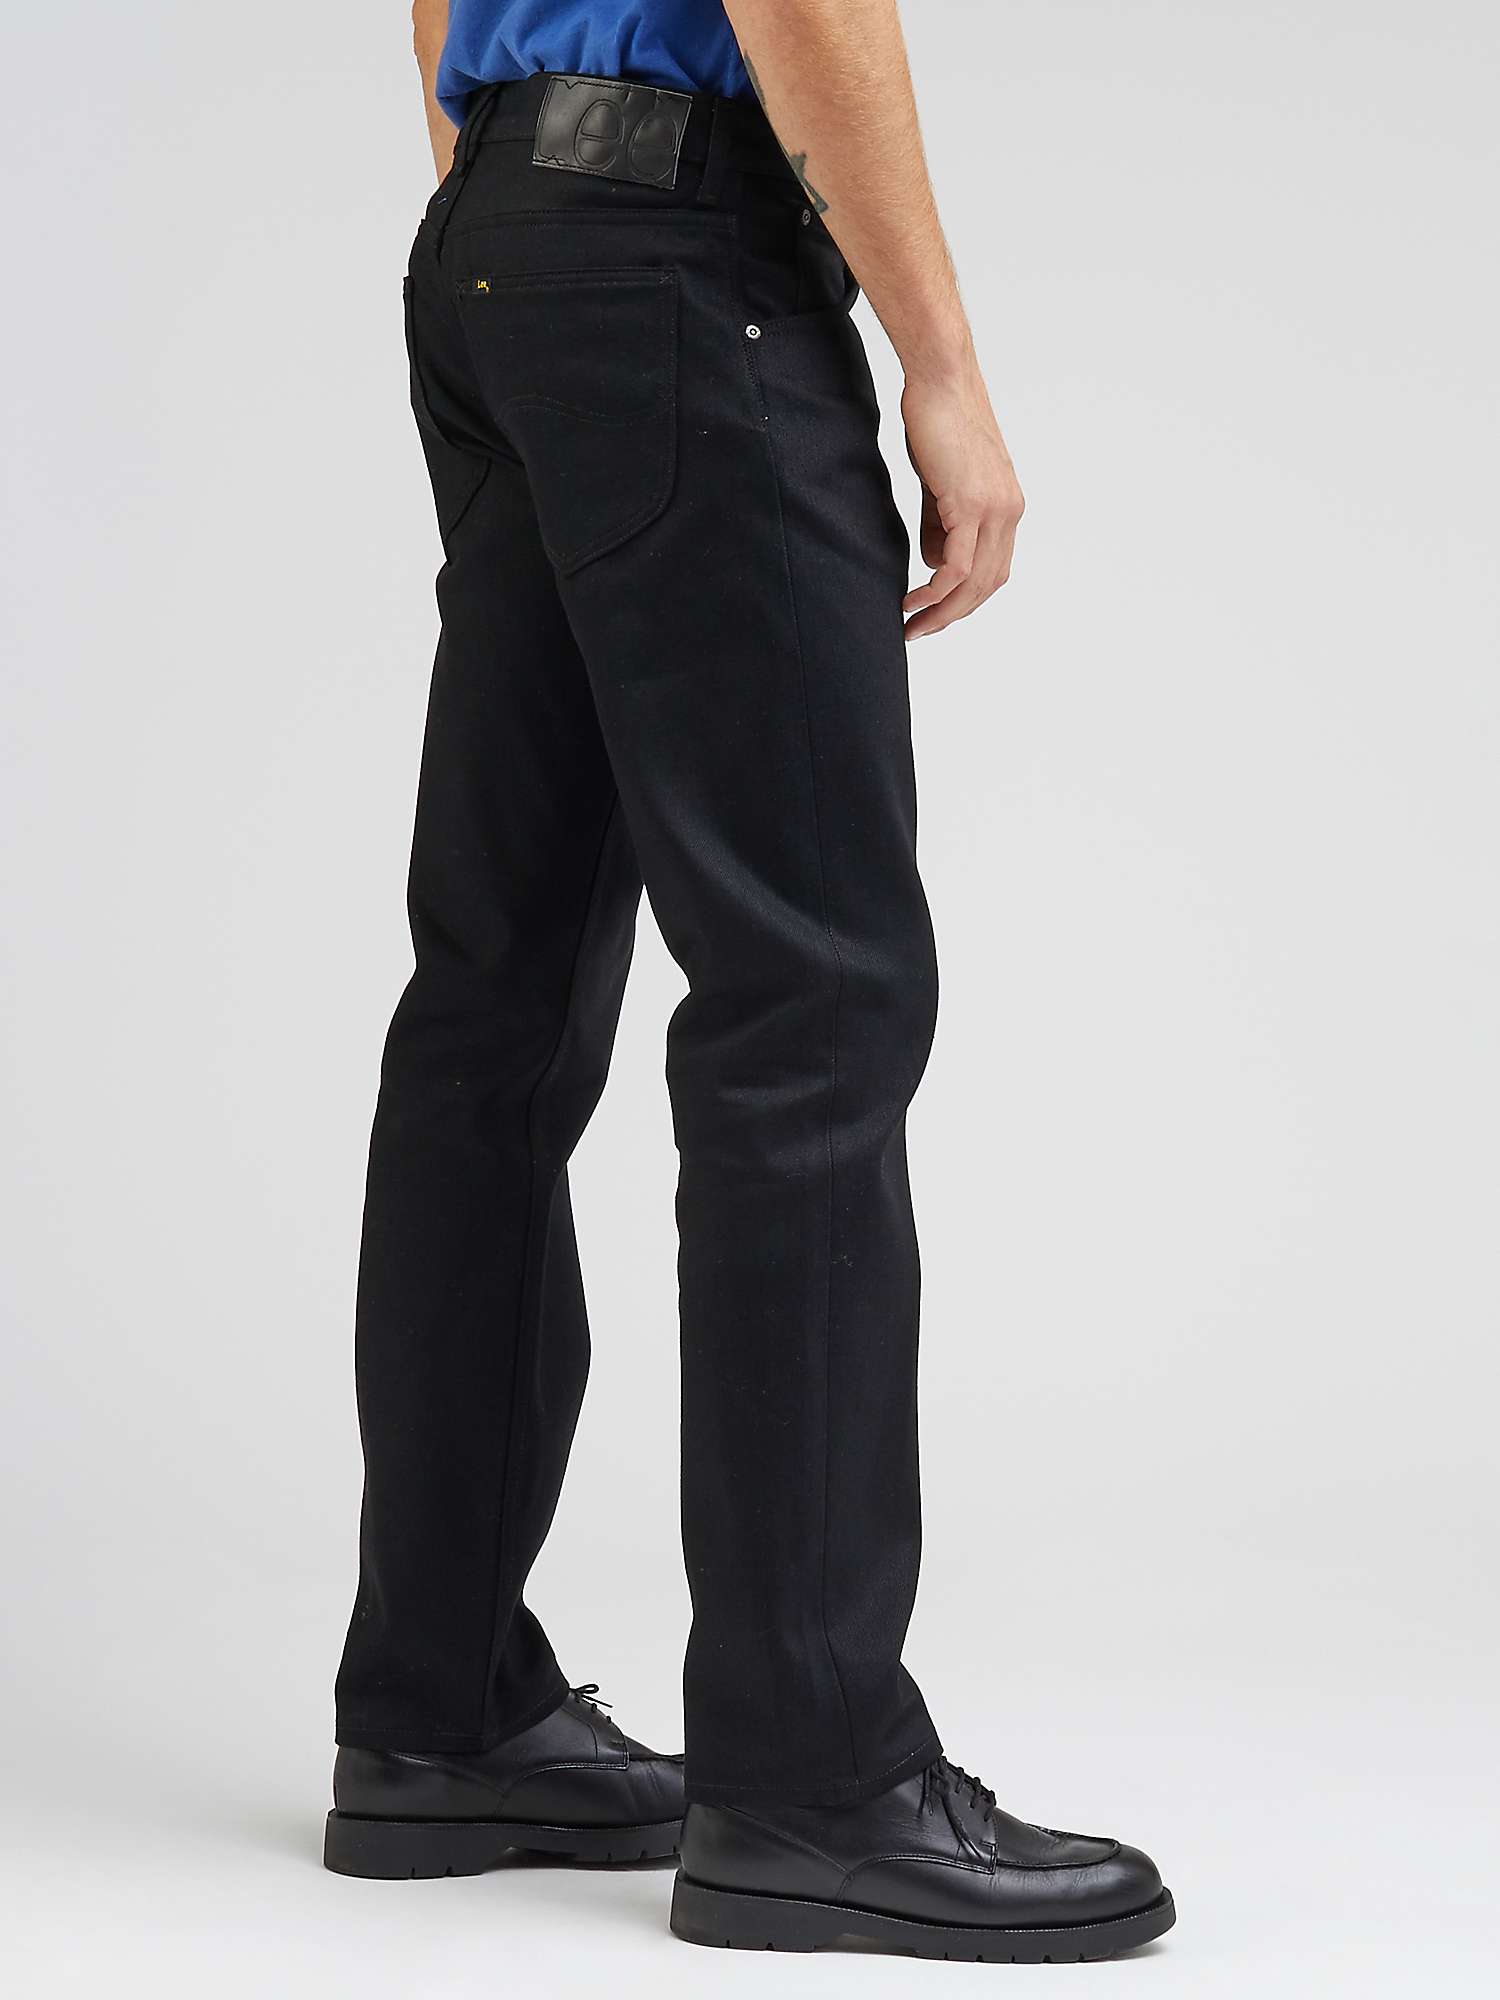 Buy Lee Authentic 101 Zip Fly Relaxed Fit Jeans Online at johnlewis.com